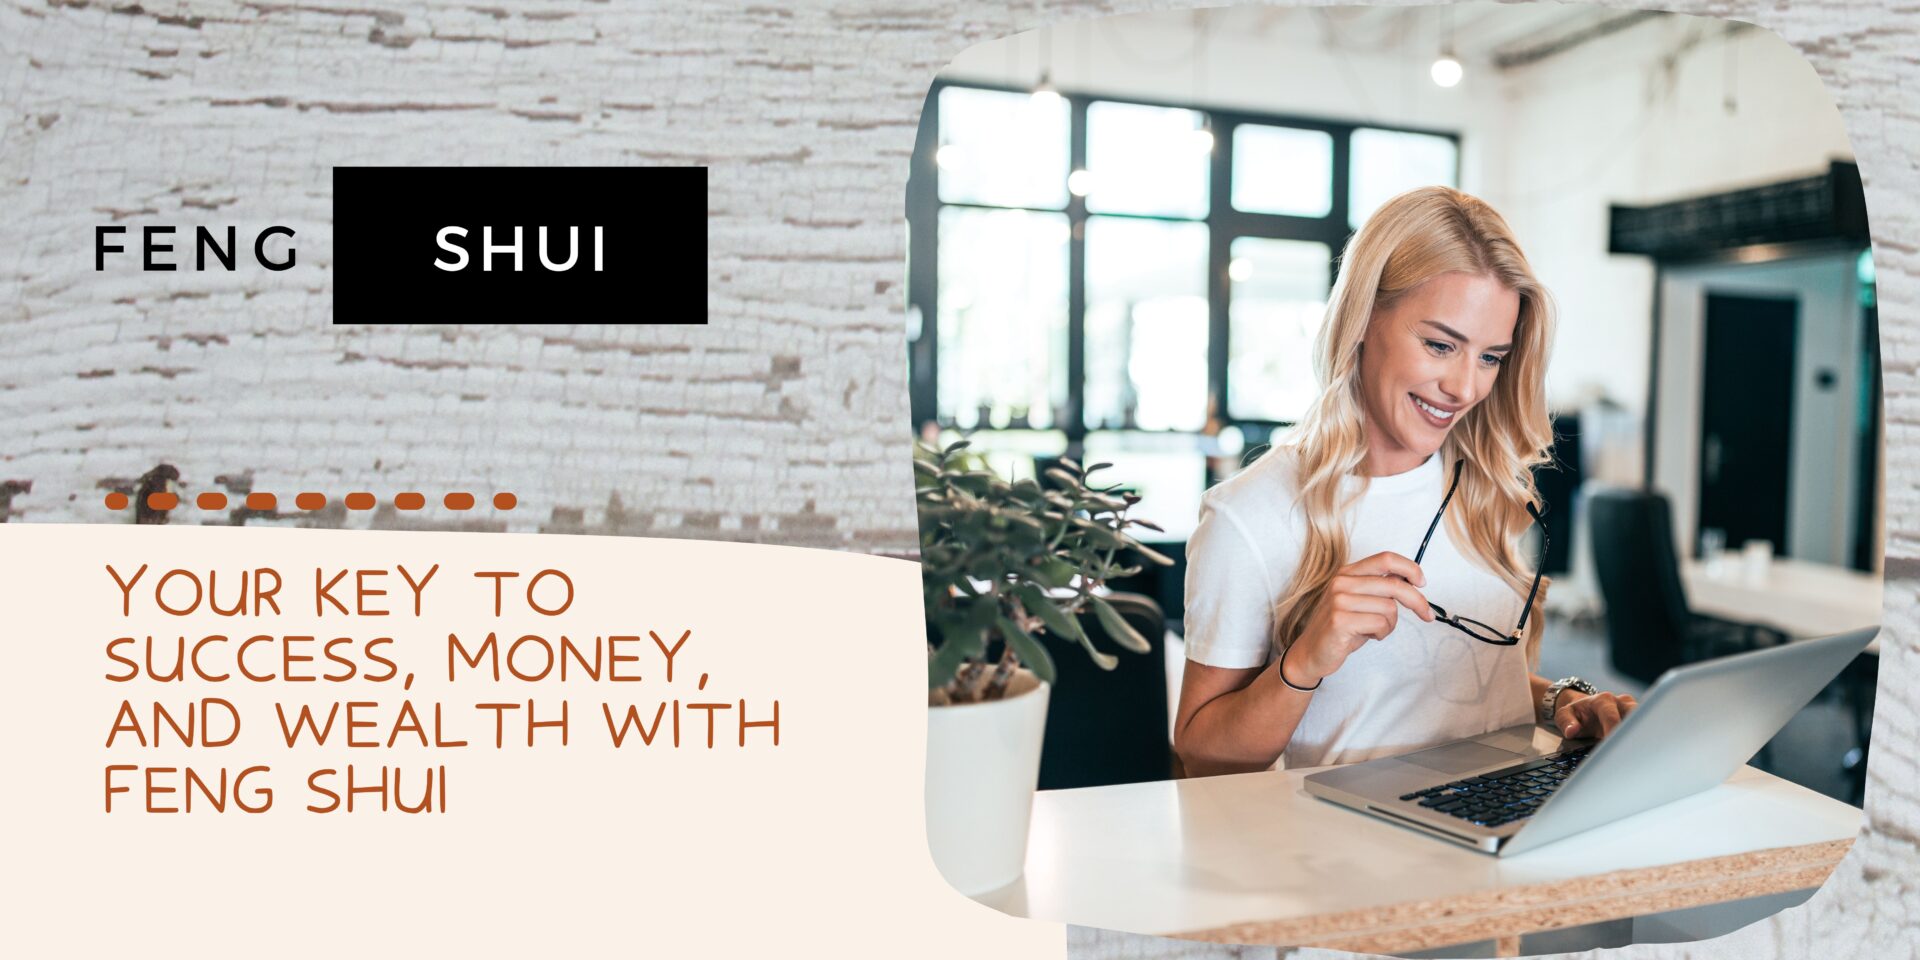 Your Key To Success, Money, And Wealth With Feng Shui